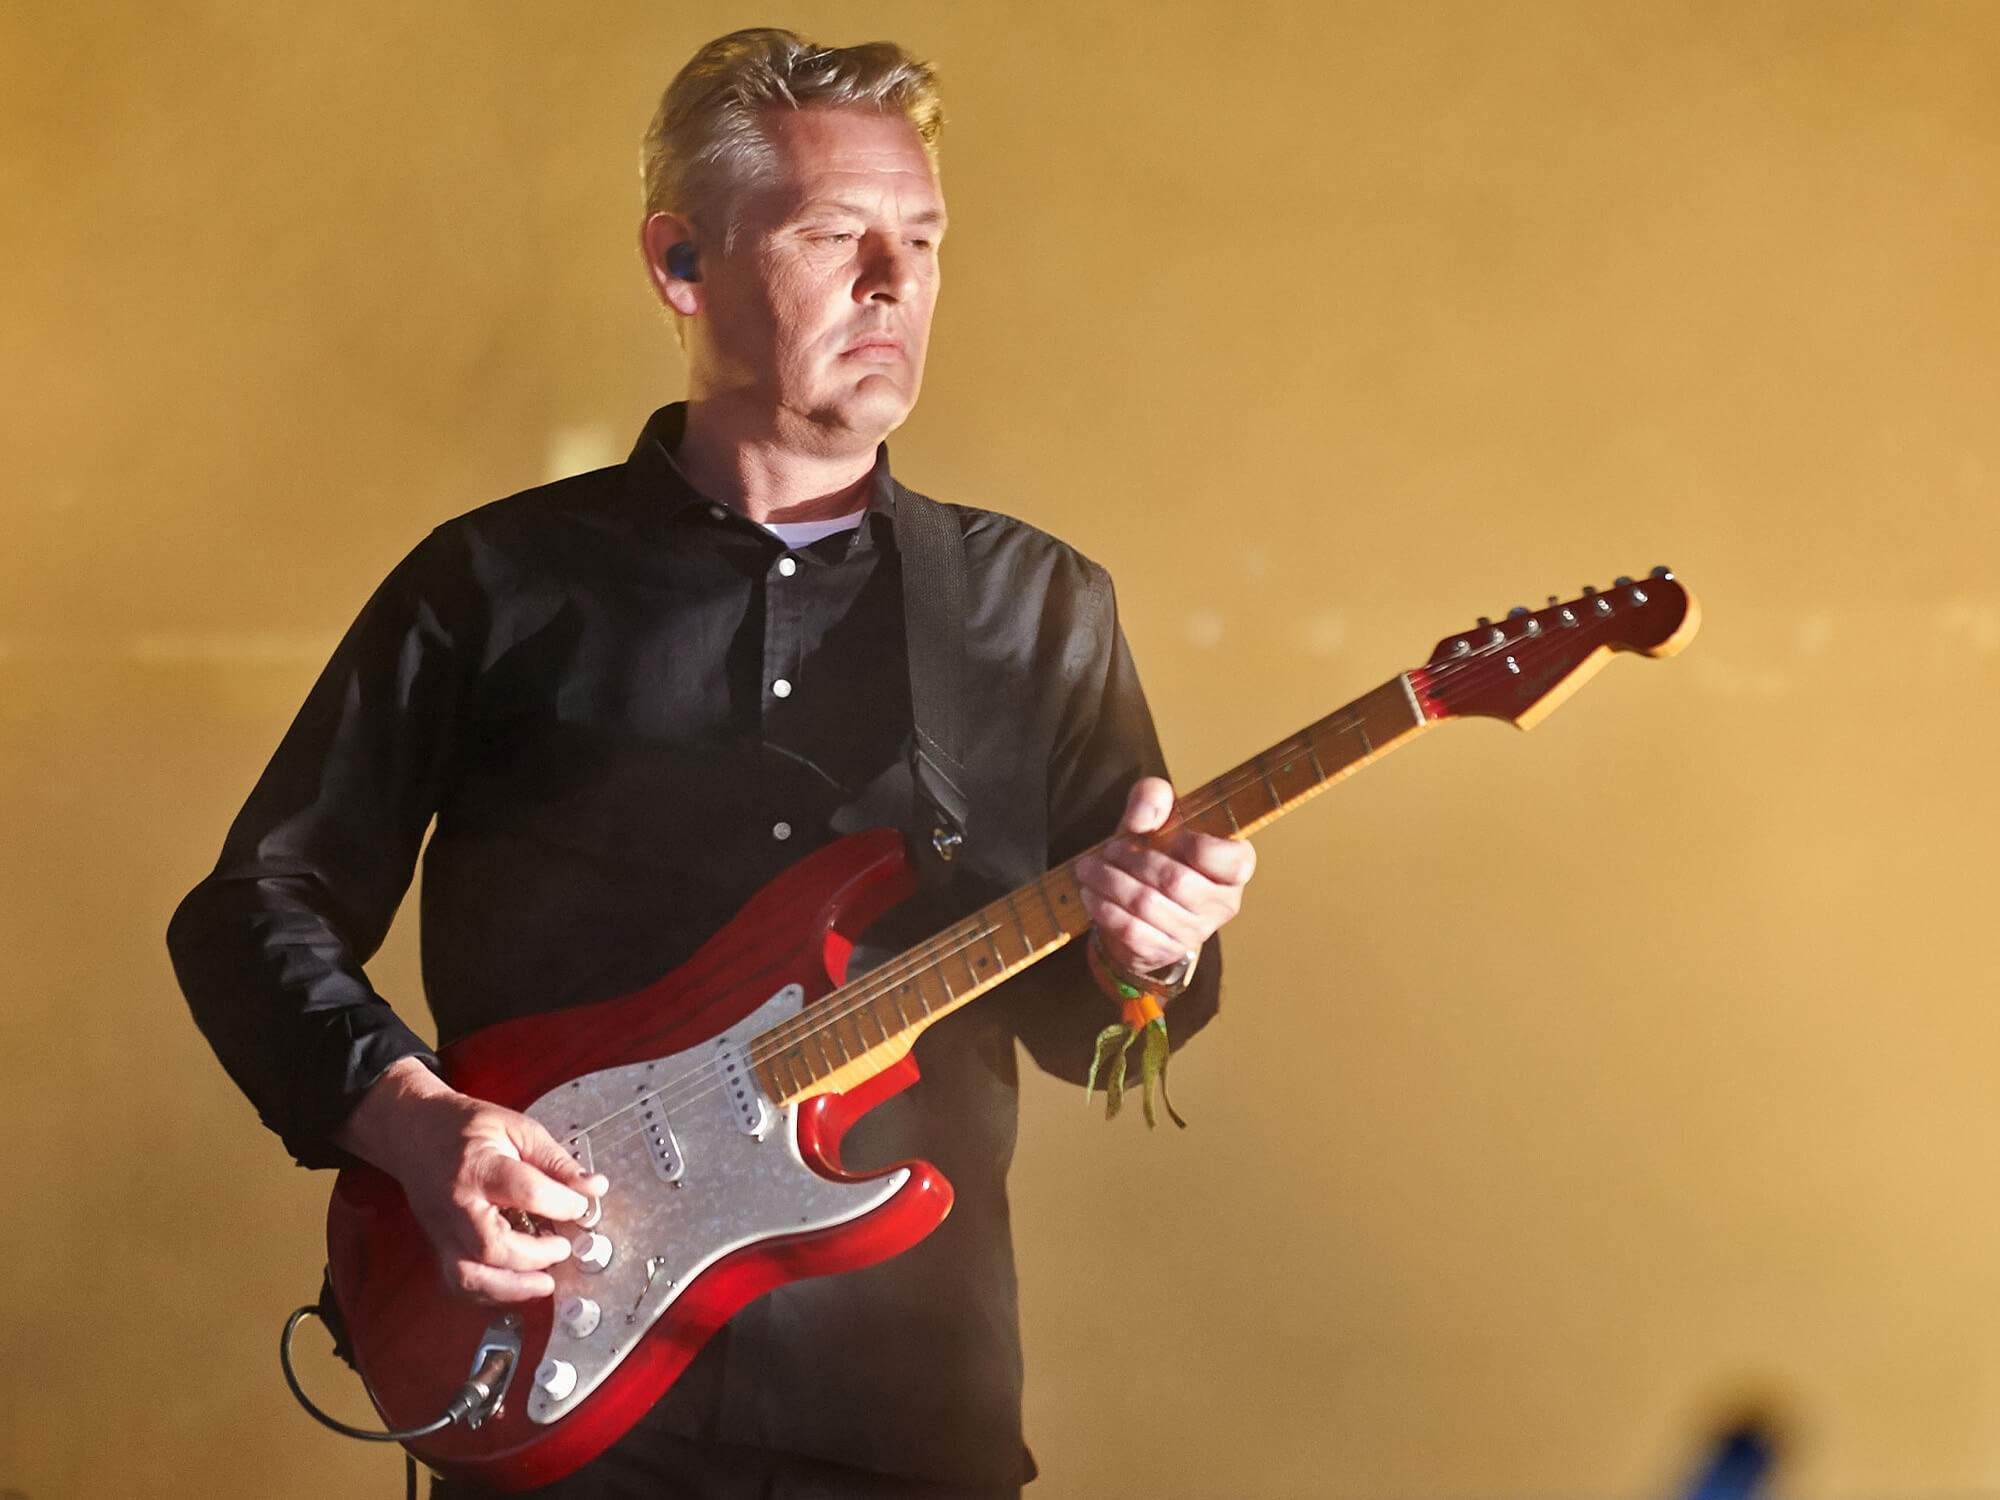 Angelo Bruschini on stage in 2014. He is playing a red Strat guitar and has a plain expression on his face.